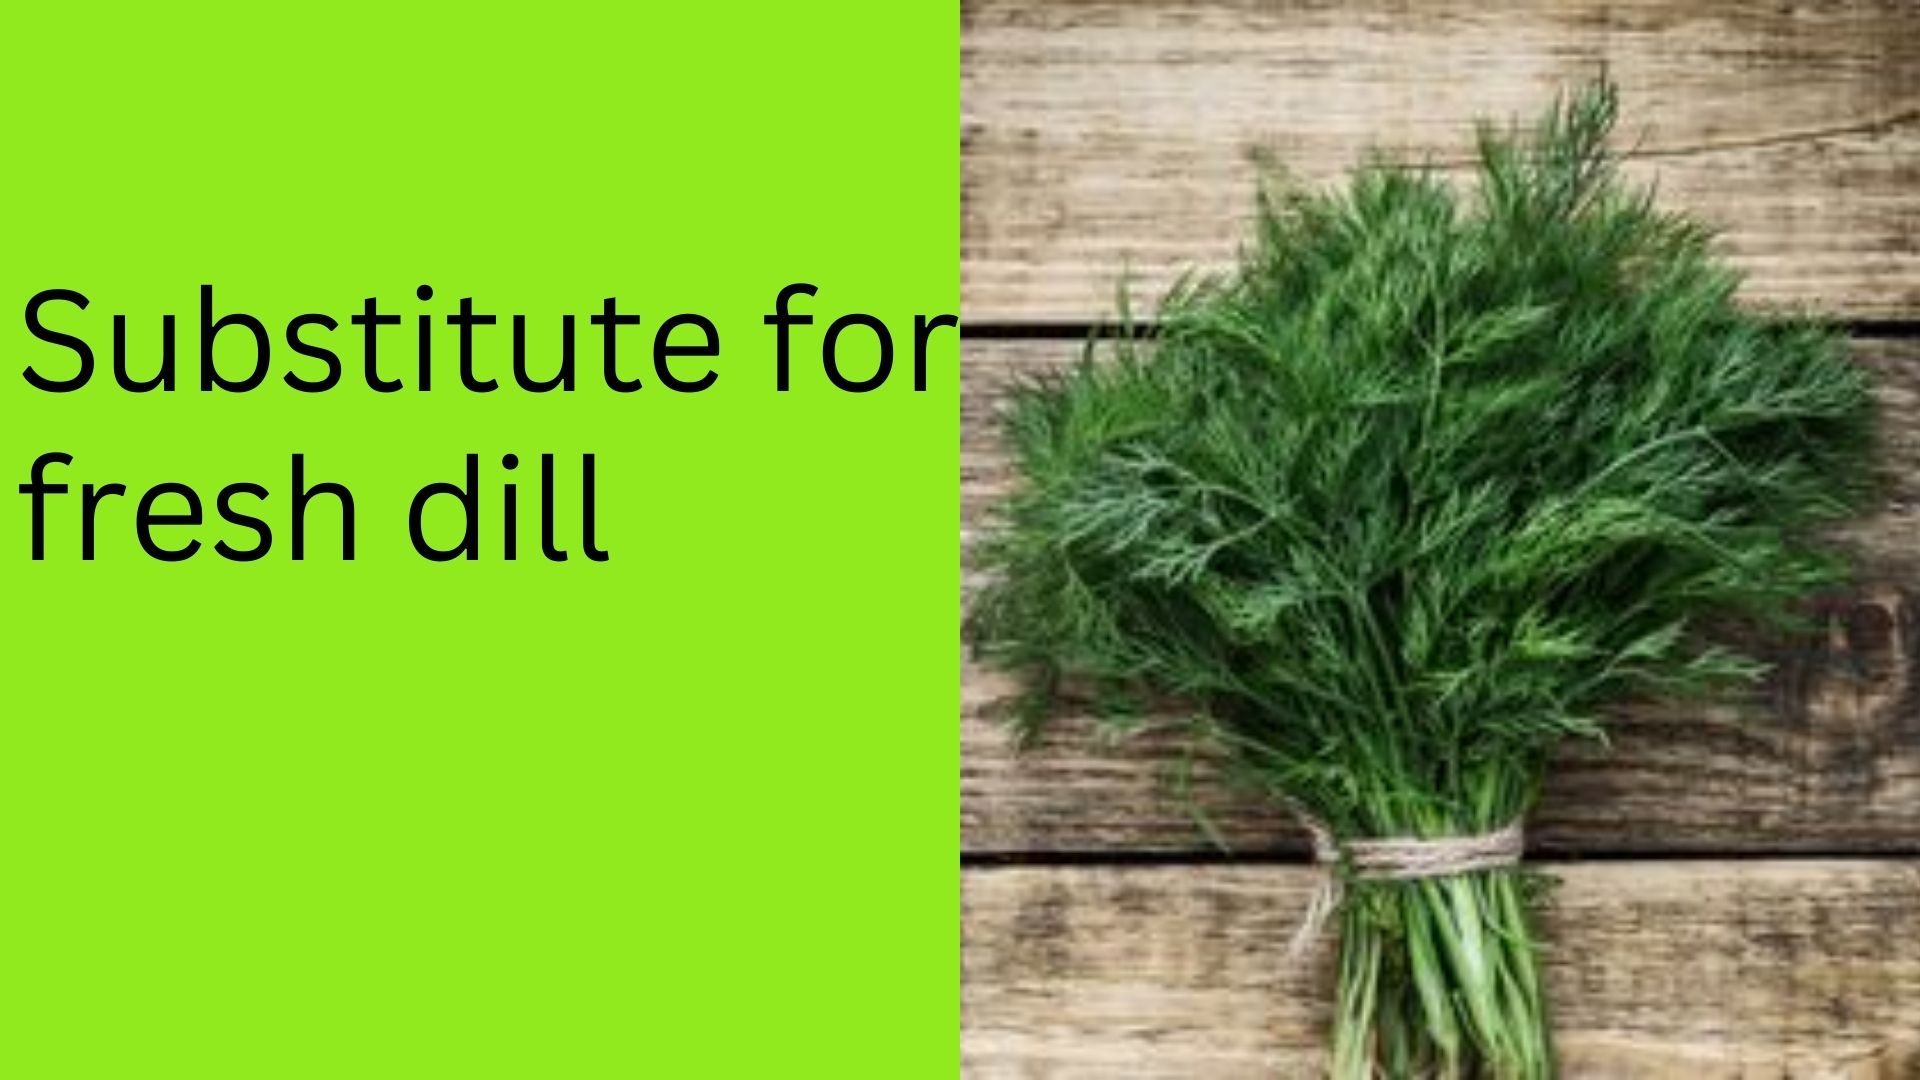 Substitute for fresh dill